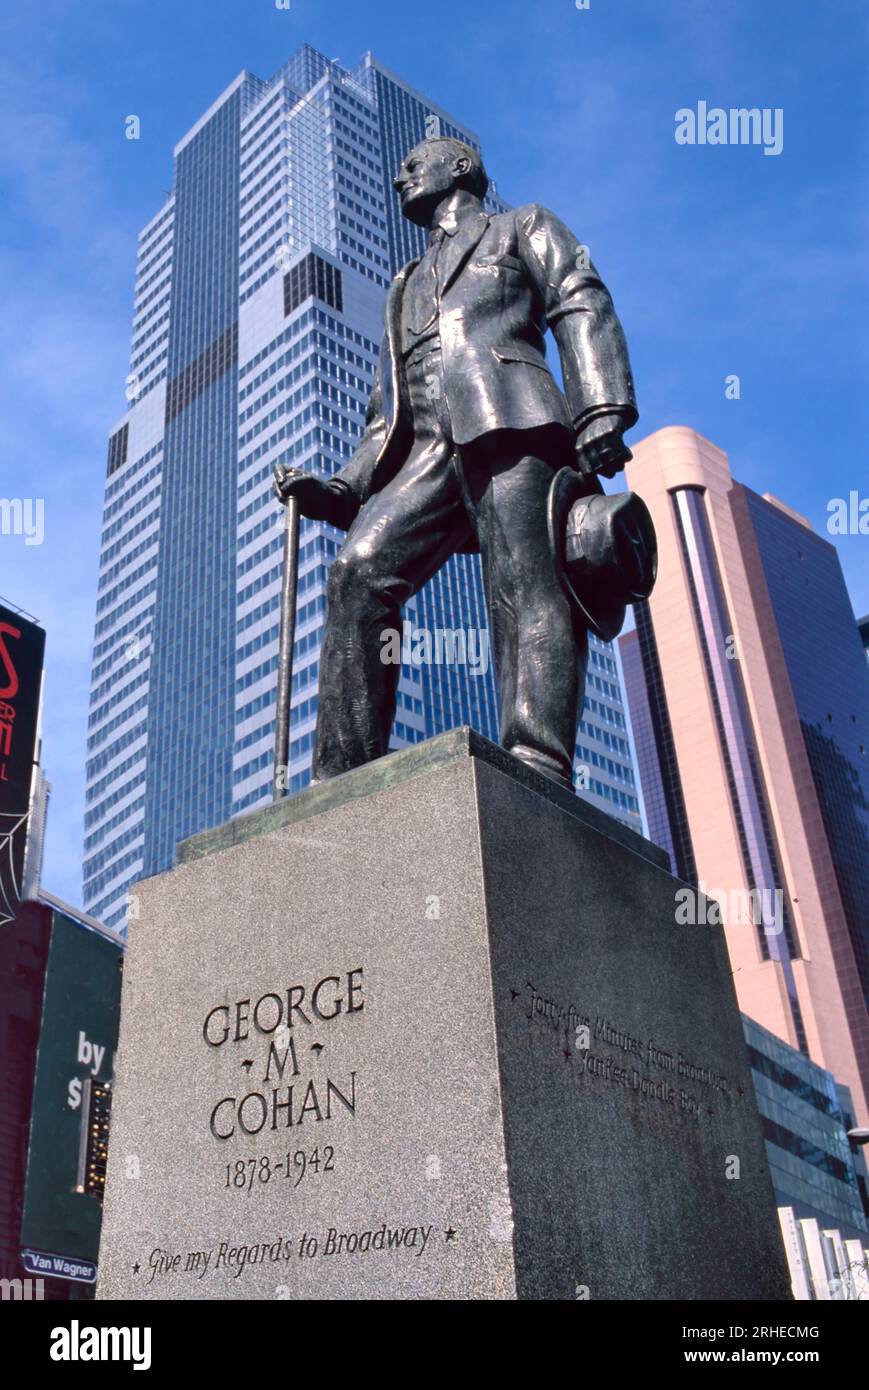 New York, NY, USA - May 2, 2018: Monument to George M. Cohan, American entertainer, playwright, composer, lyricist, actor, singer, dancer and theatric Stock Photo